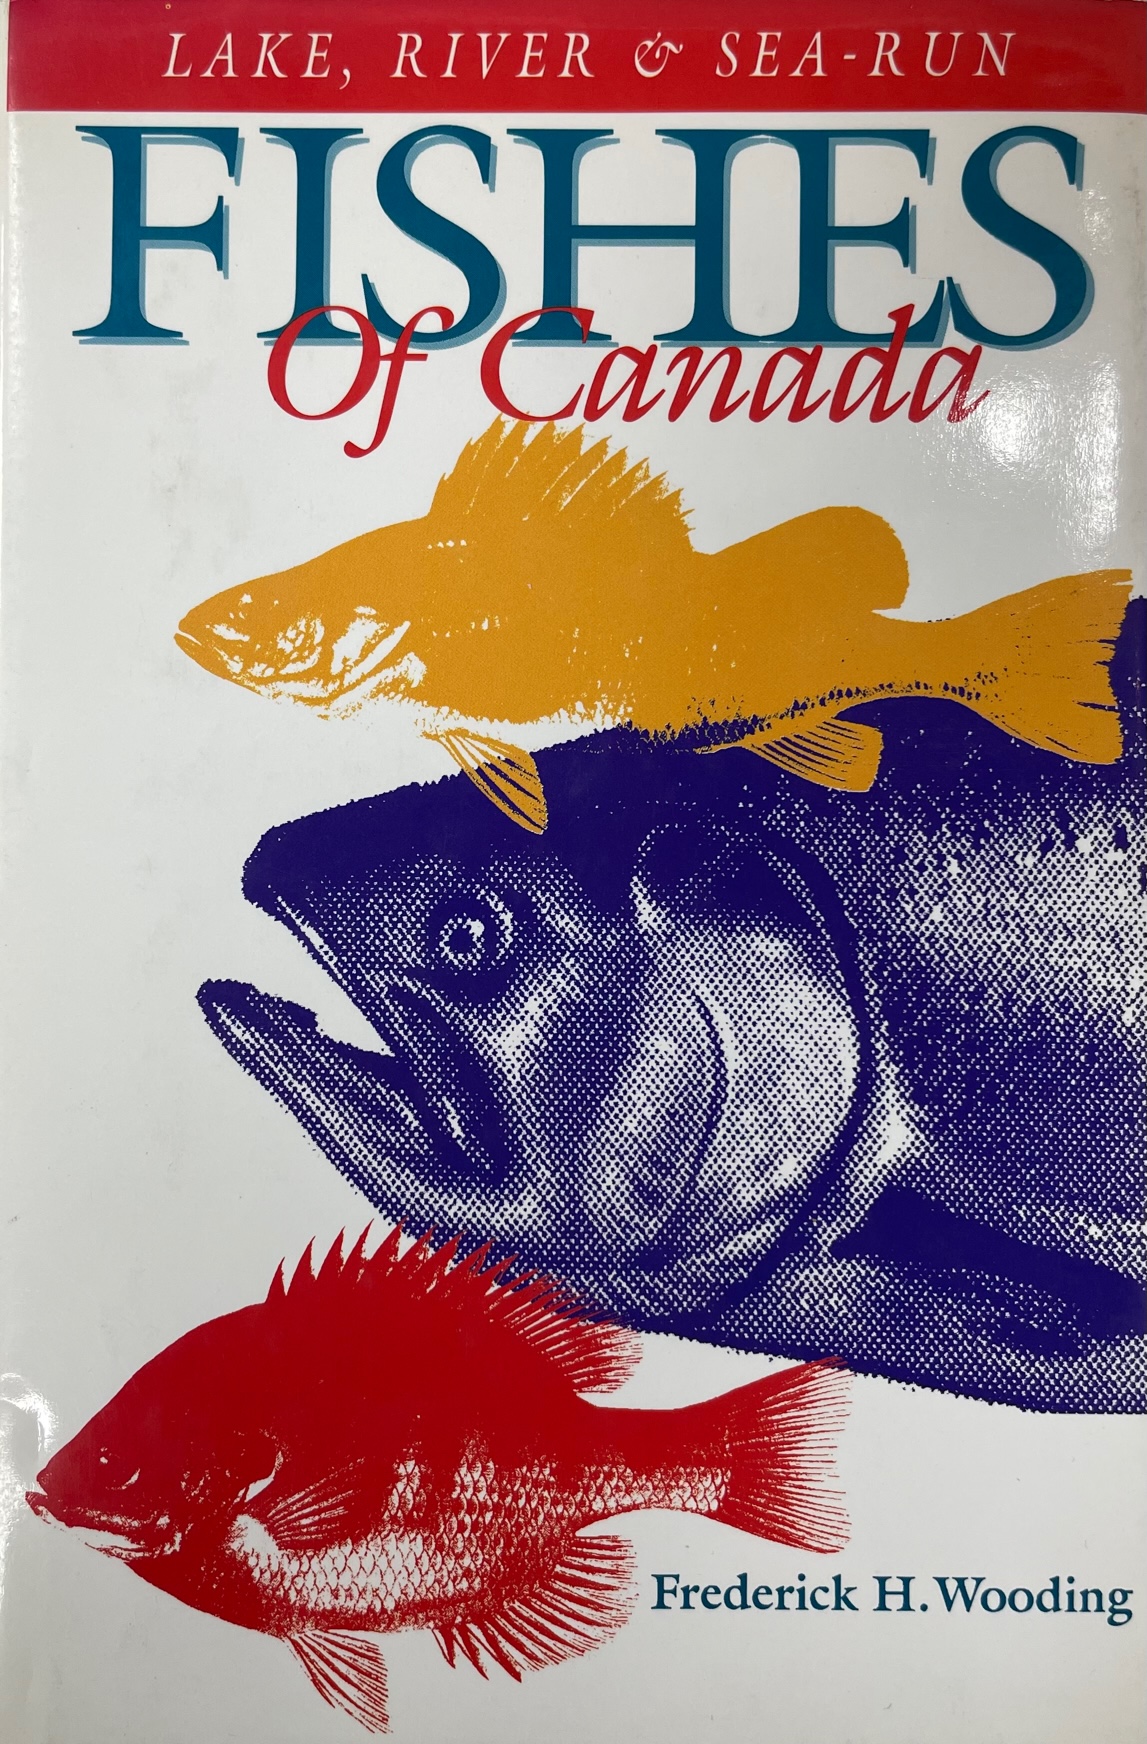 Misc Lake, River & Sea-Run Fishes of Canada